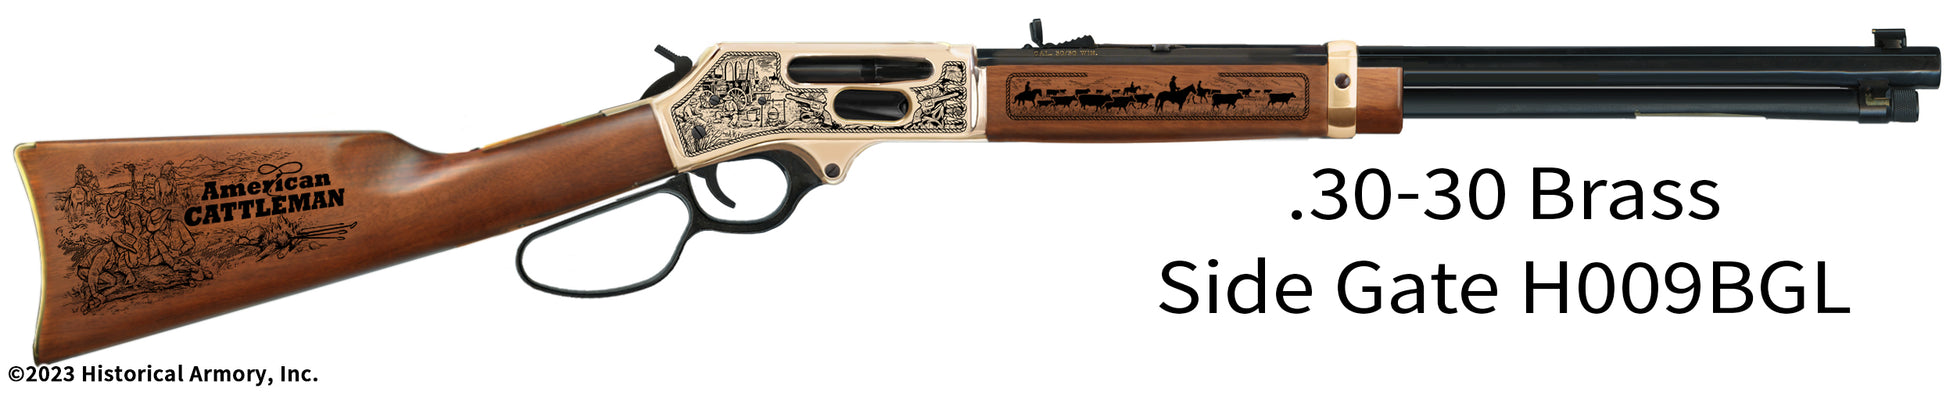 American Cattleman Limited Edition Henry .30-30 Brass Side Gate Engraved Rifle